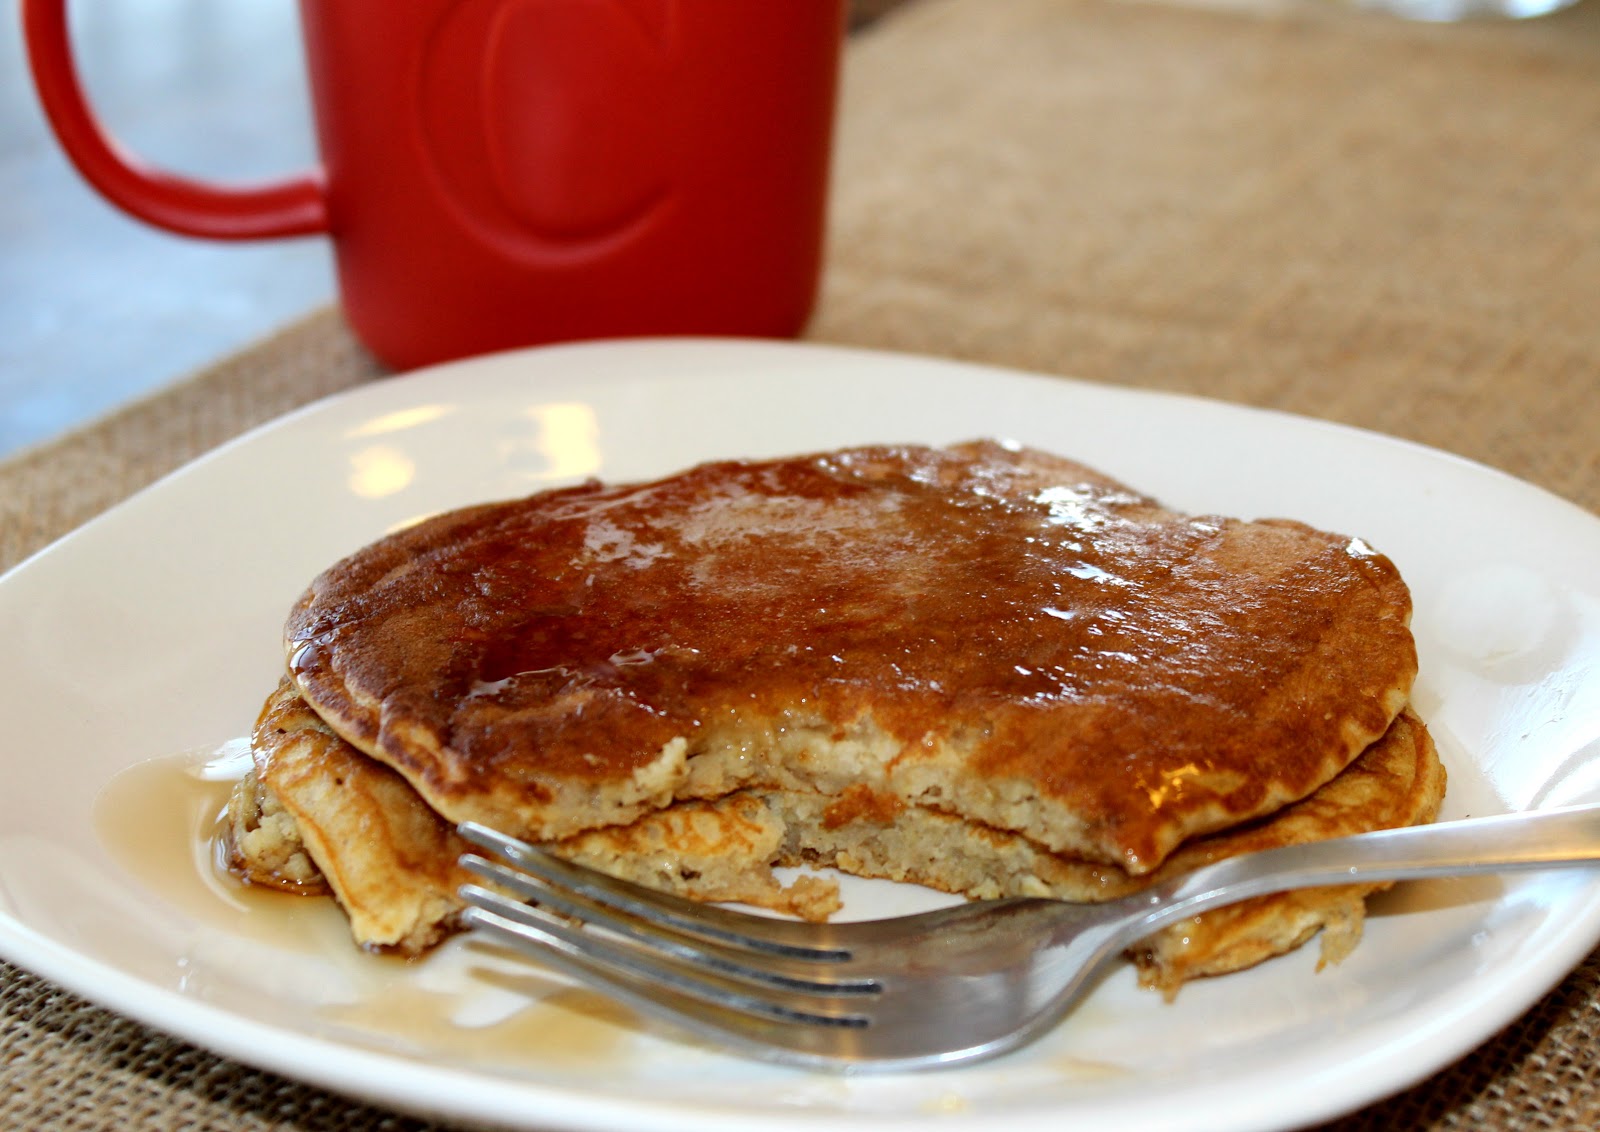 Oatmeal  and plain how Apple with & to pancakes bicarb make flour spice: soda Pancakes sugar